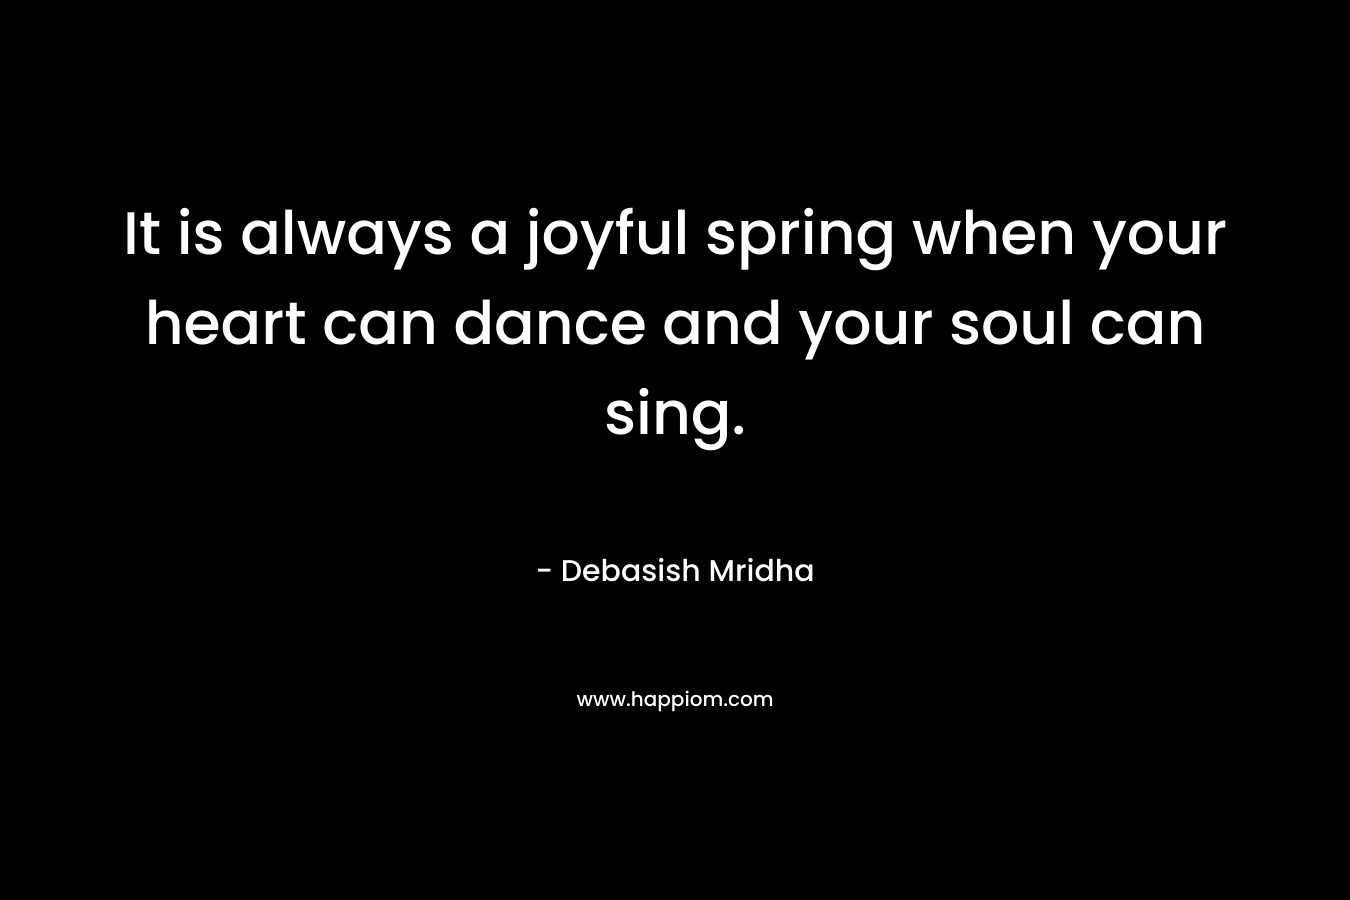 It is always a joyful spring when your heart can dance and your soul can sing.